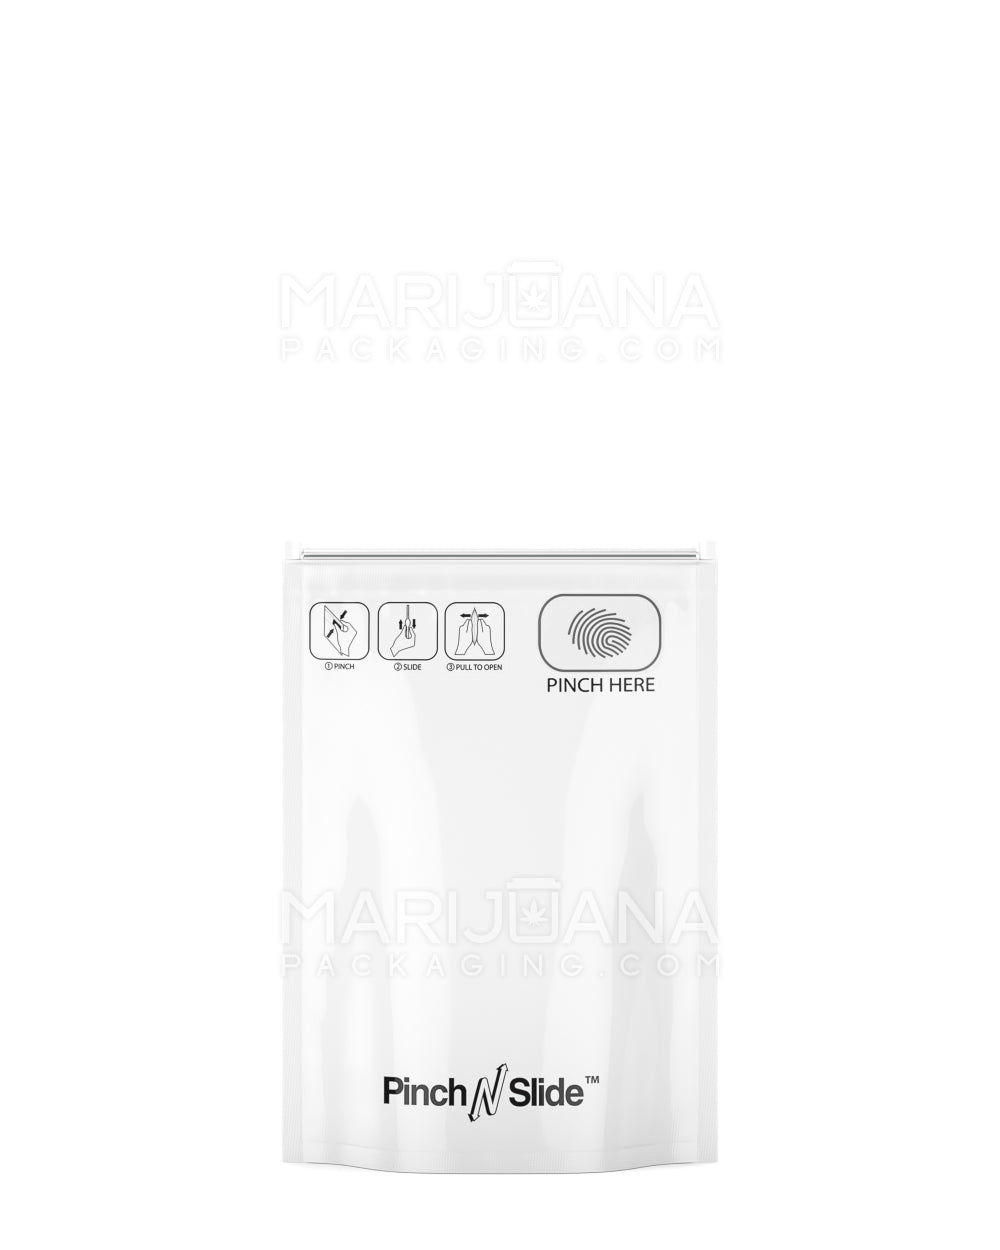 Child Resistant | Pinch N Slide ASTM Glossy White Mylar Bags | 3.5in x 5in - 3.5g - 250 Count - 1